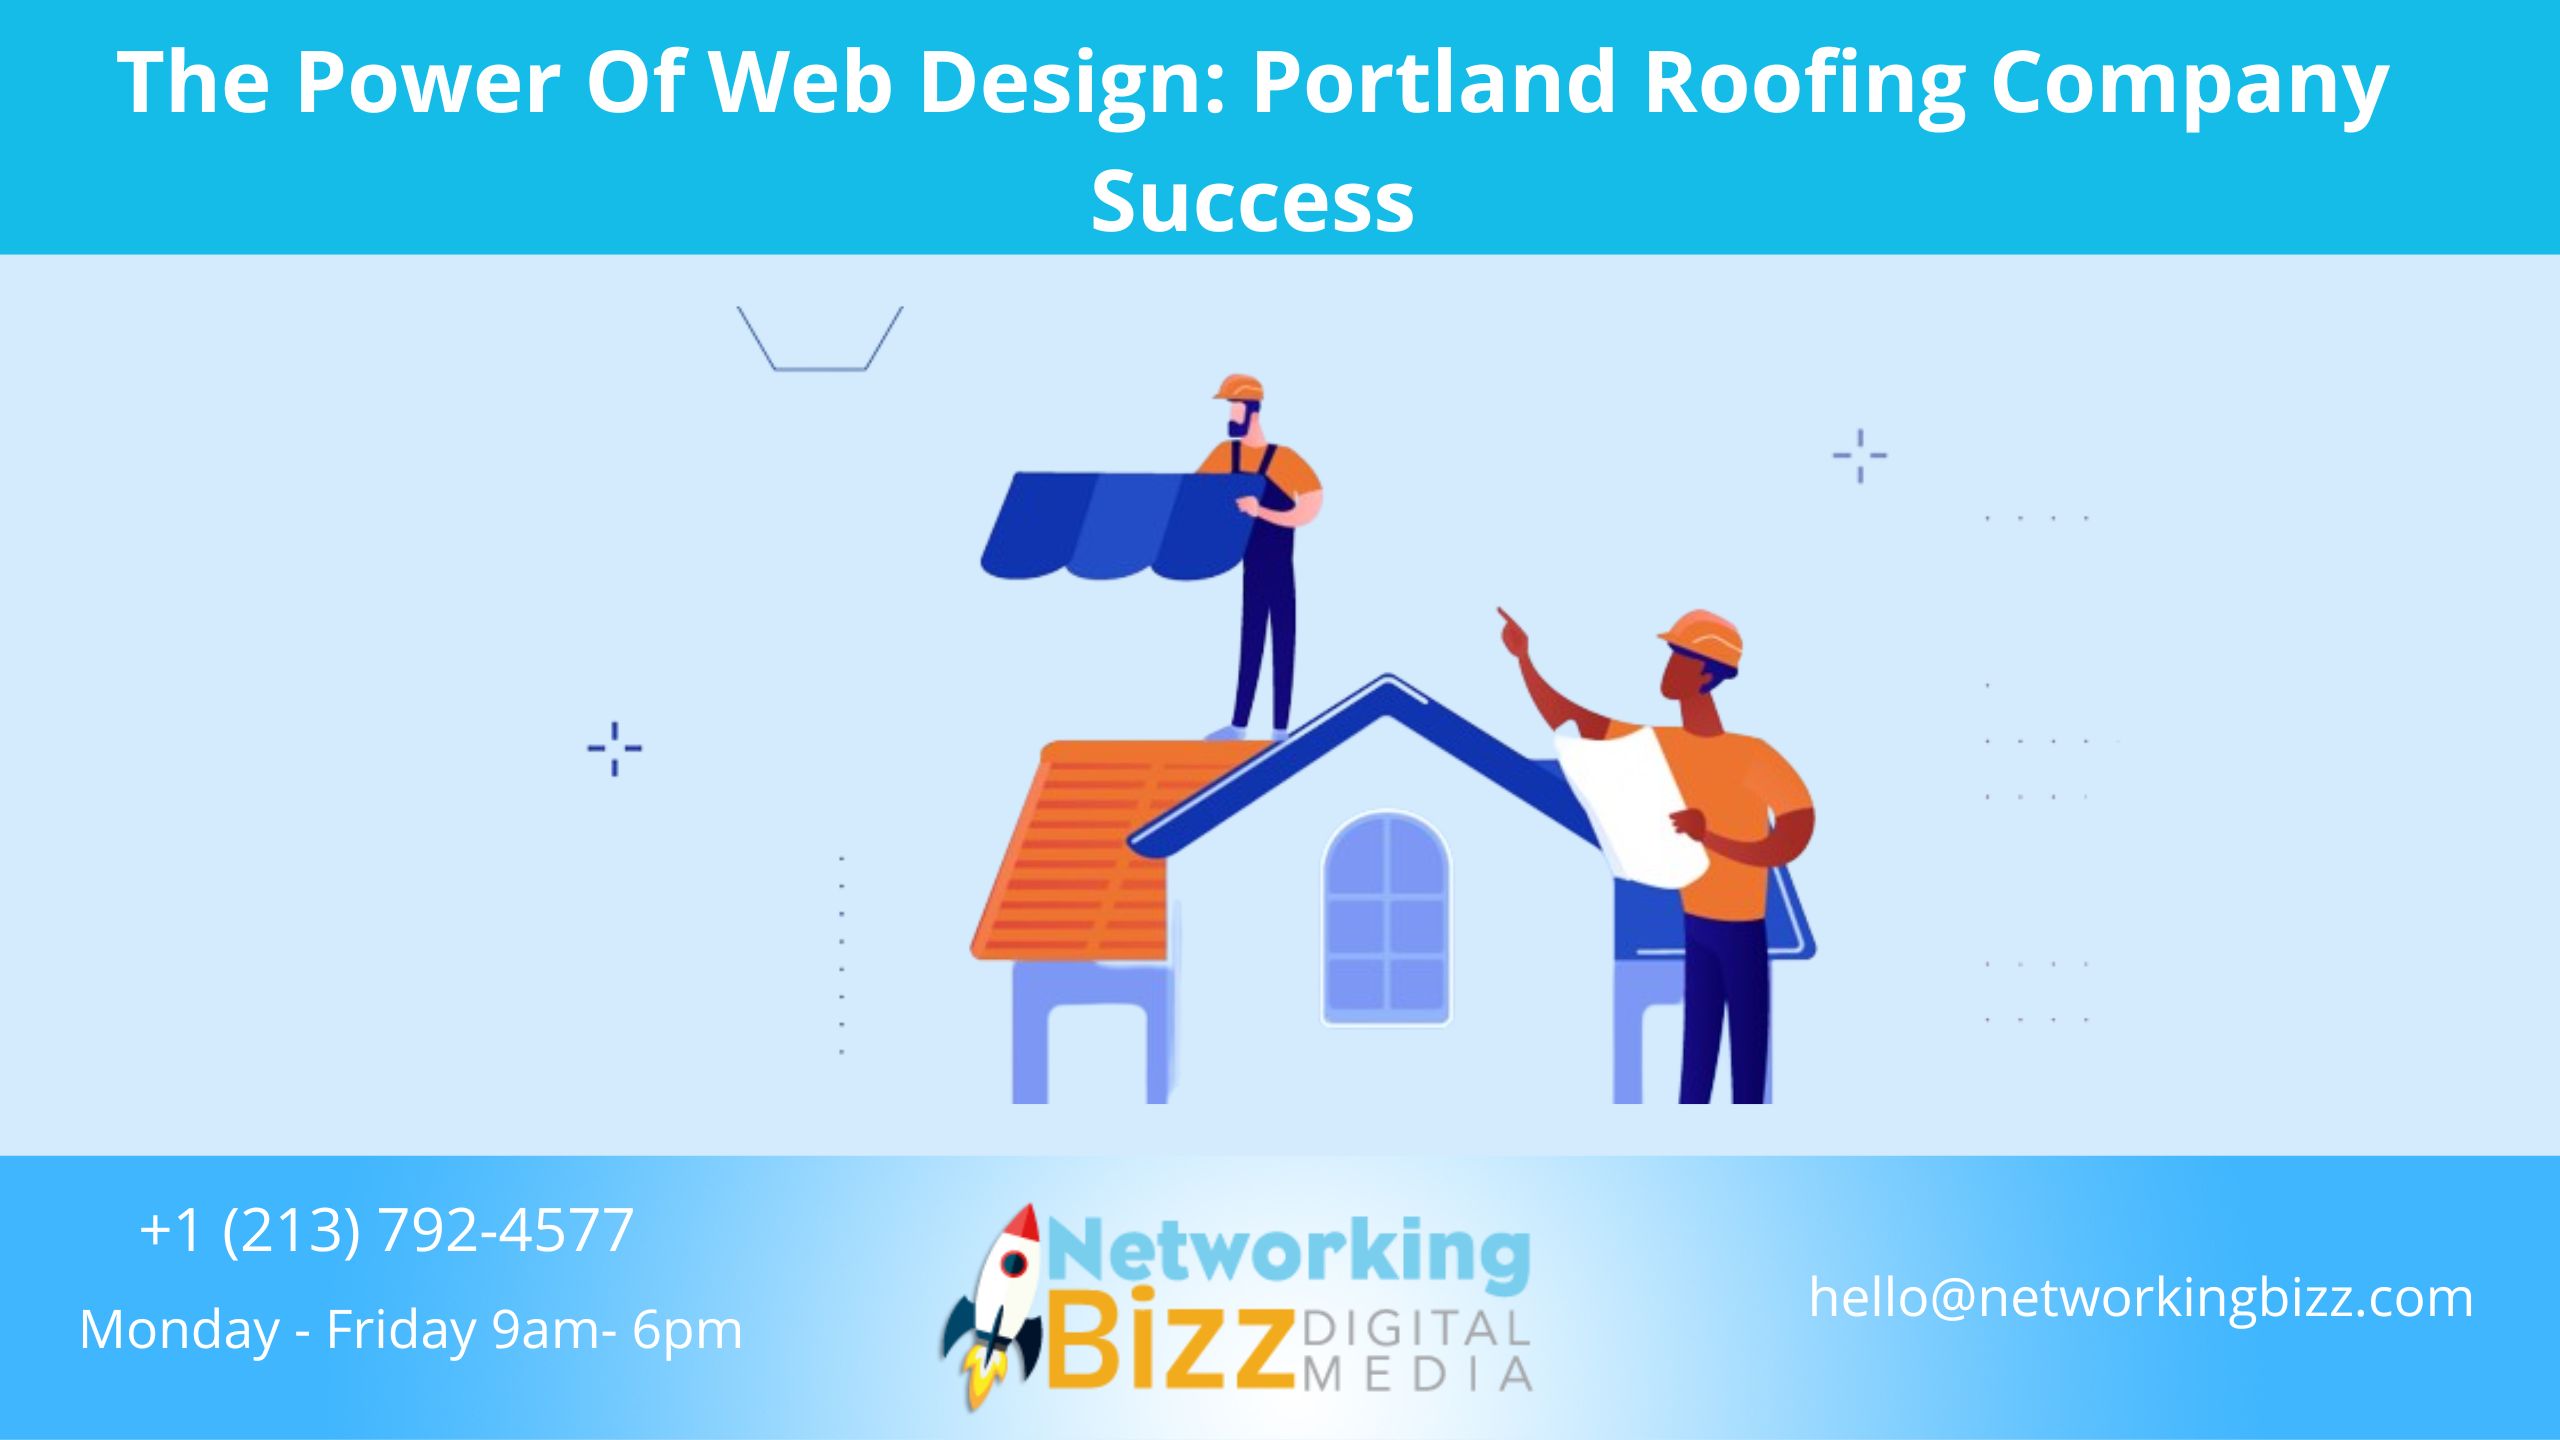 The Power Of Web Design: Portland Roofing Company Success